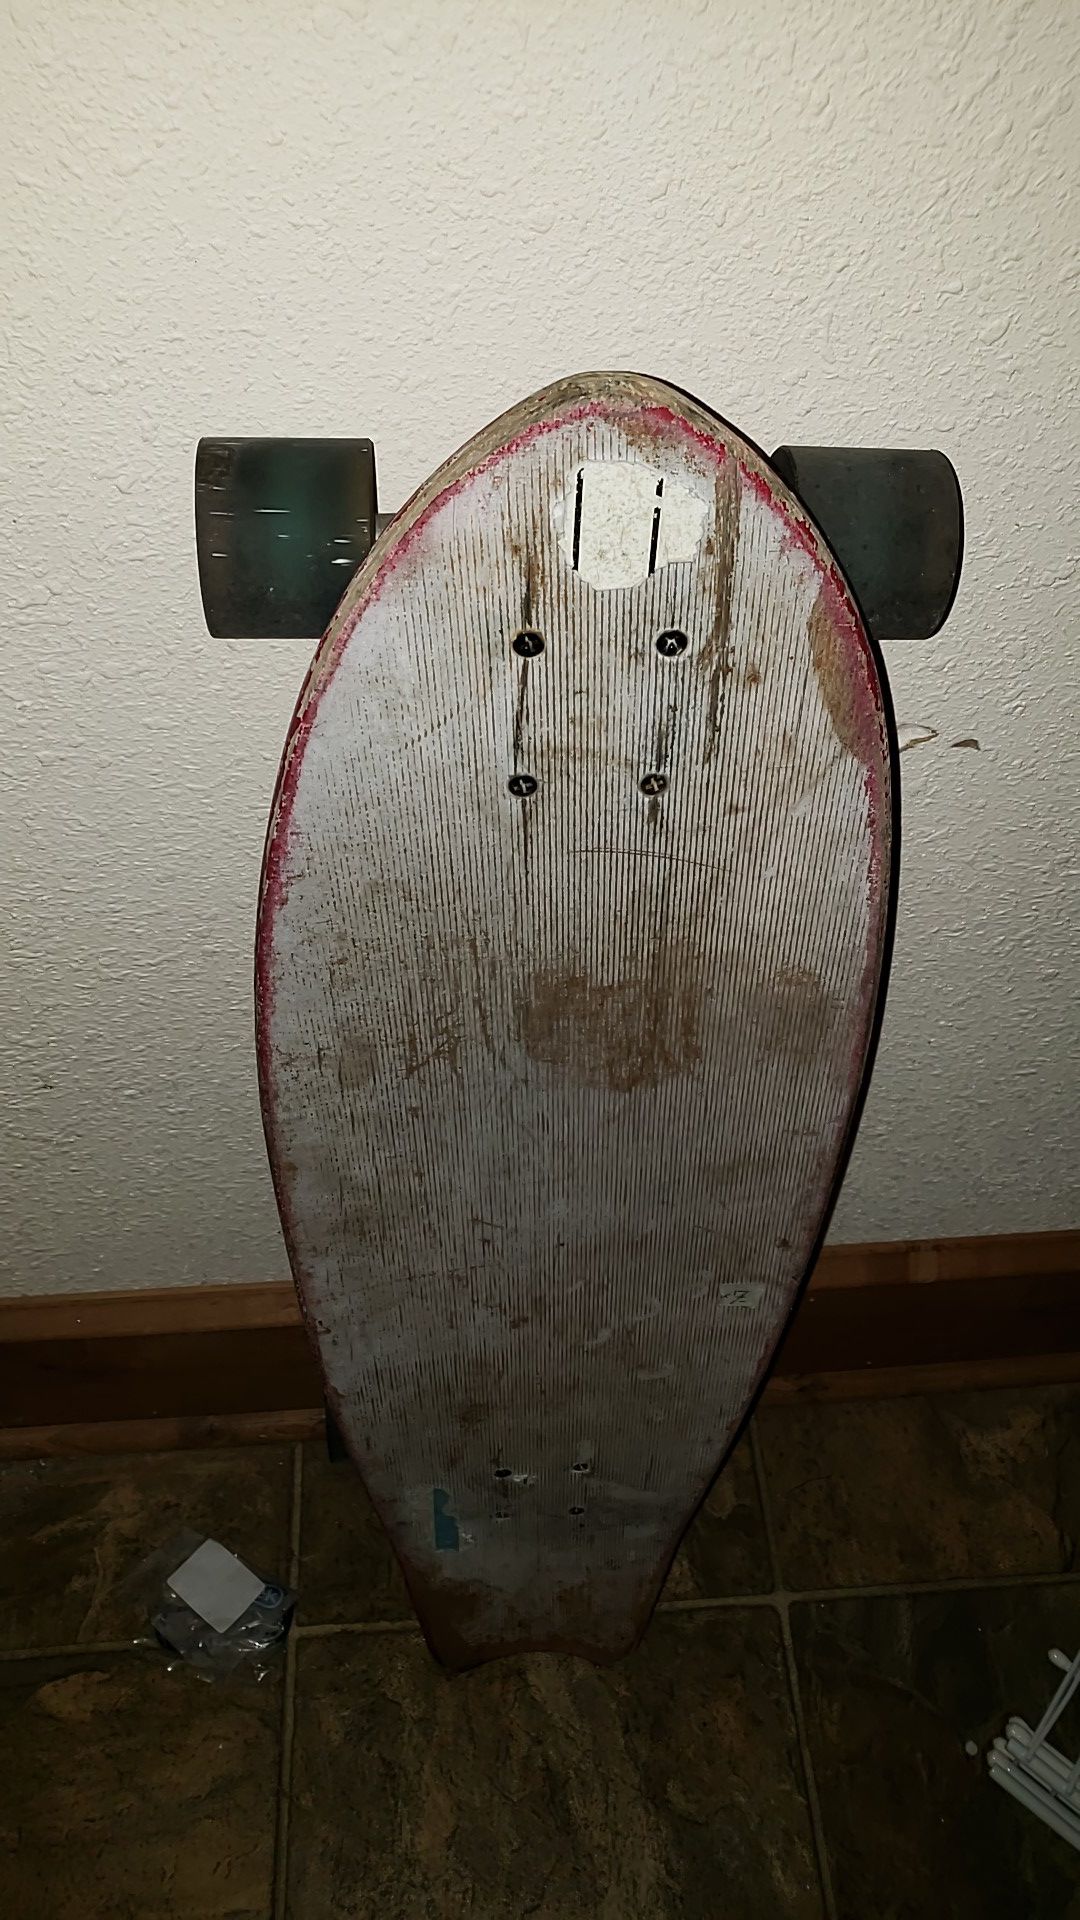 Medium long board, could use grip tape